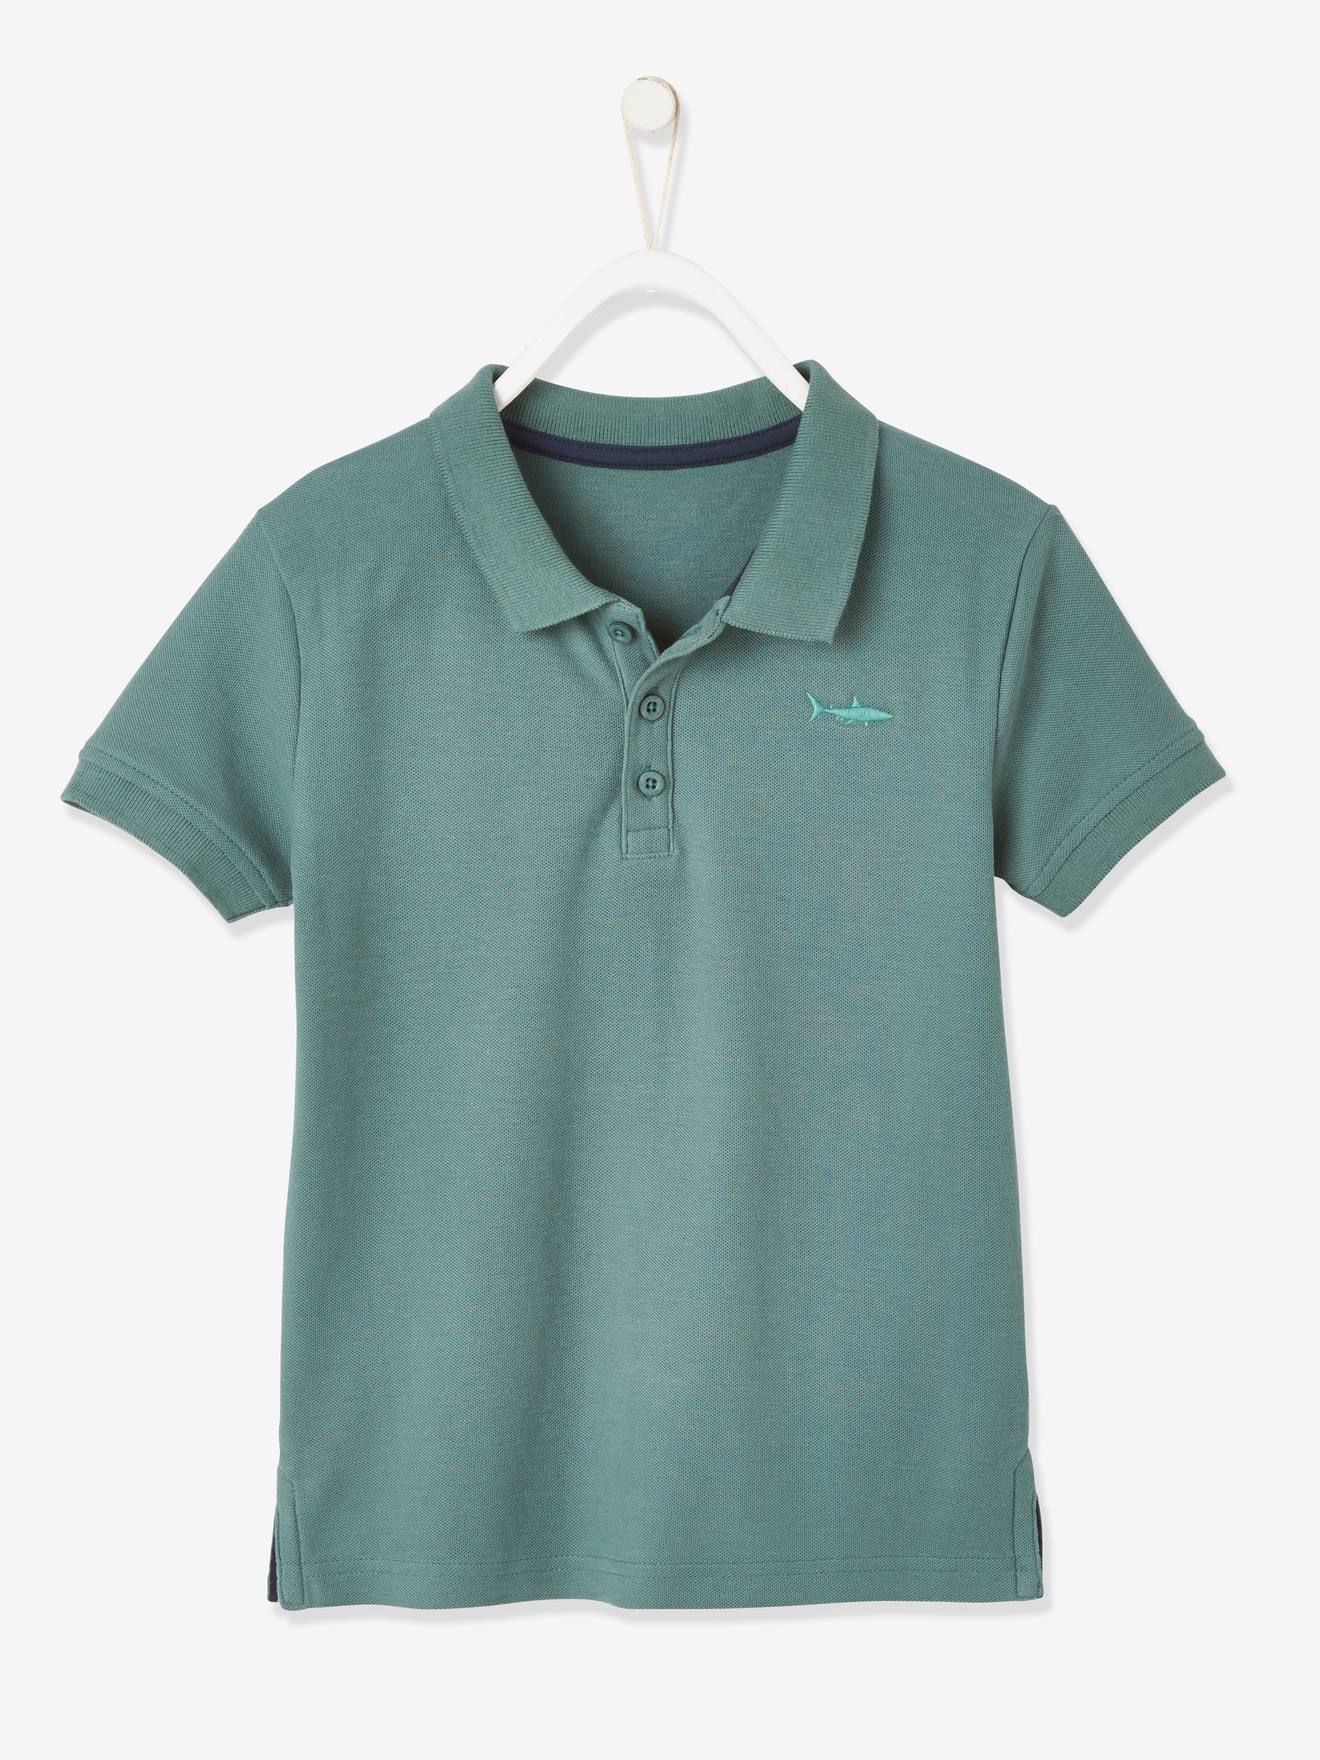 polo t shirt embroidery